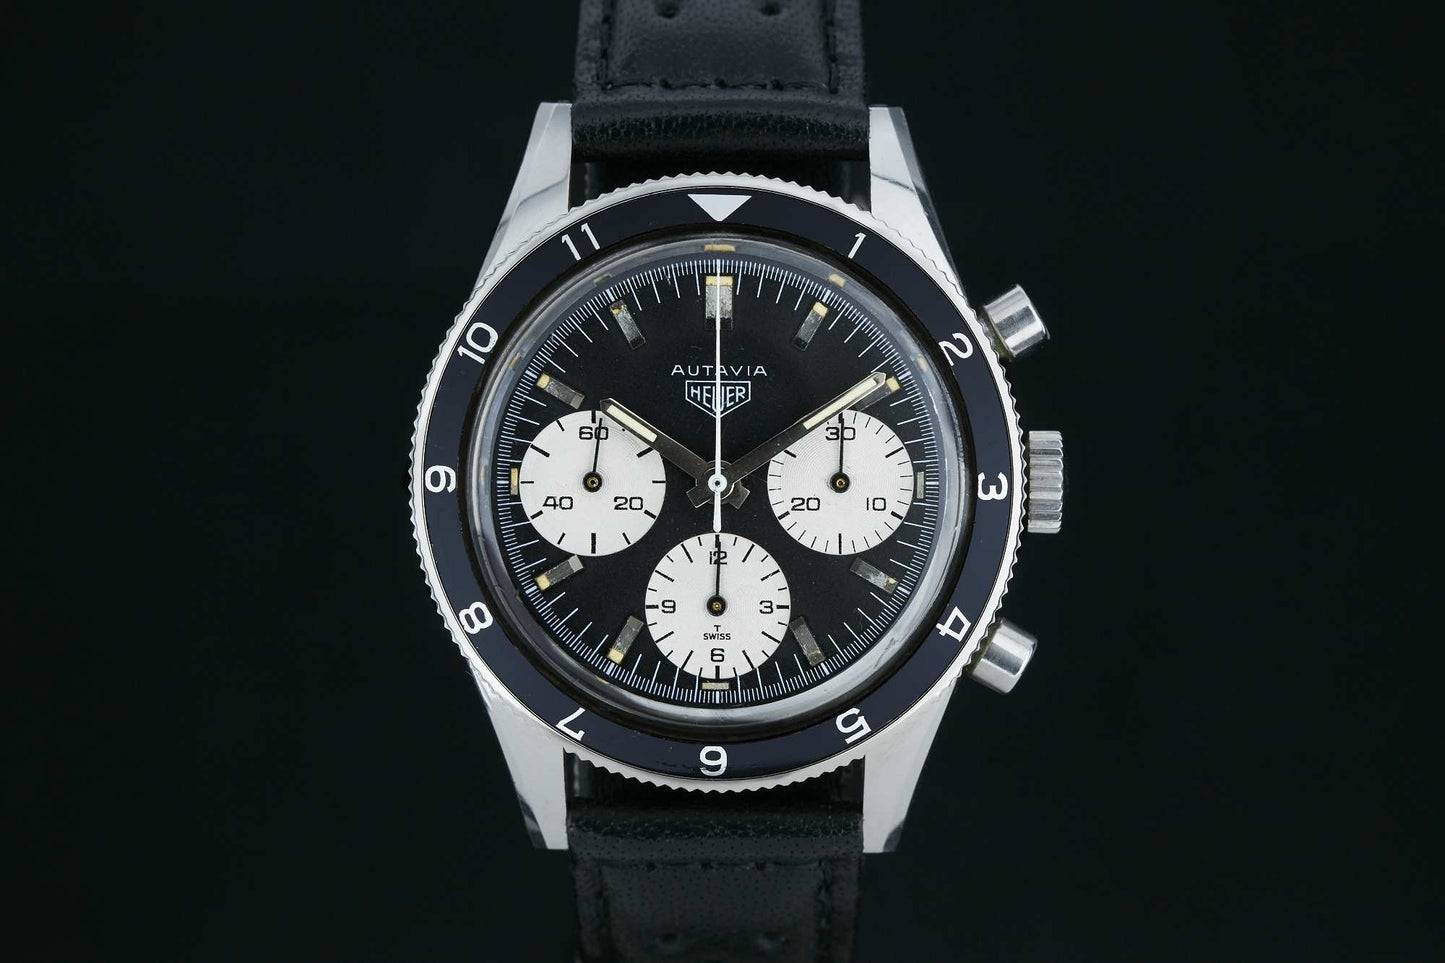 Heuer Autavia Reference 2446 "Rindt"